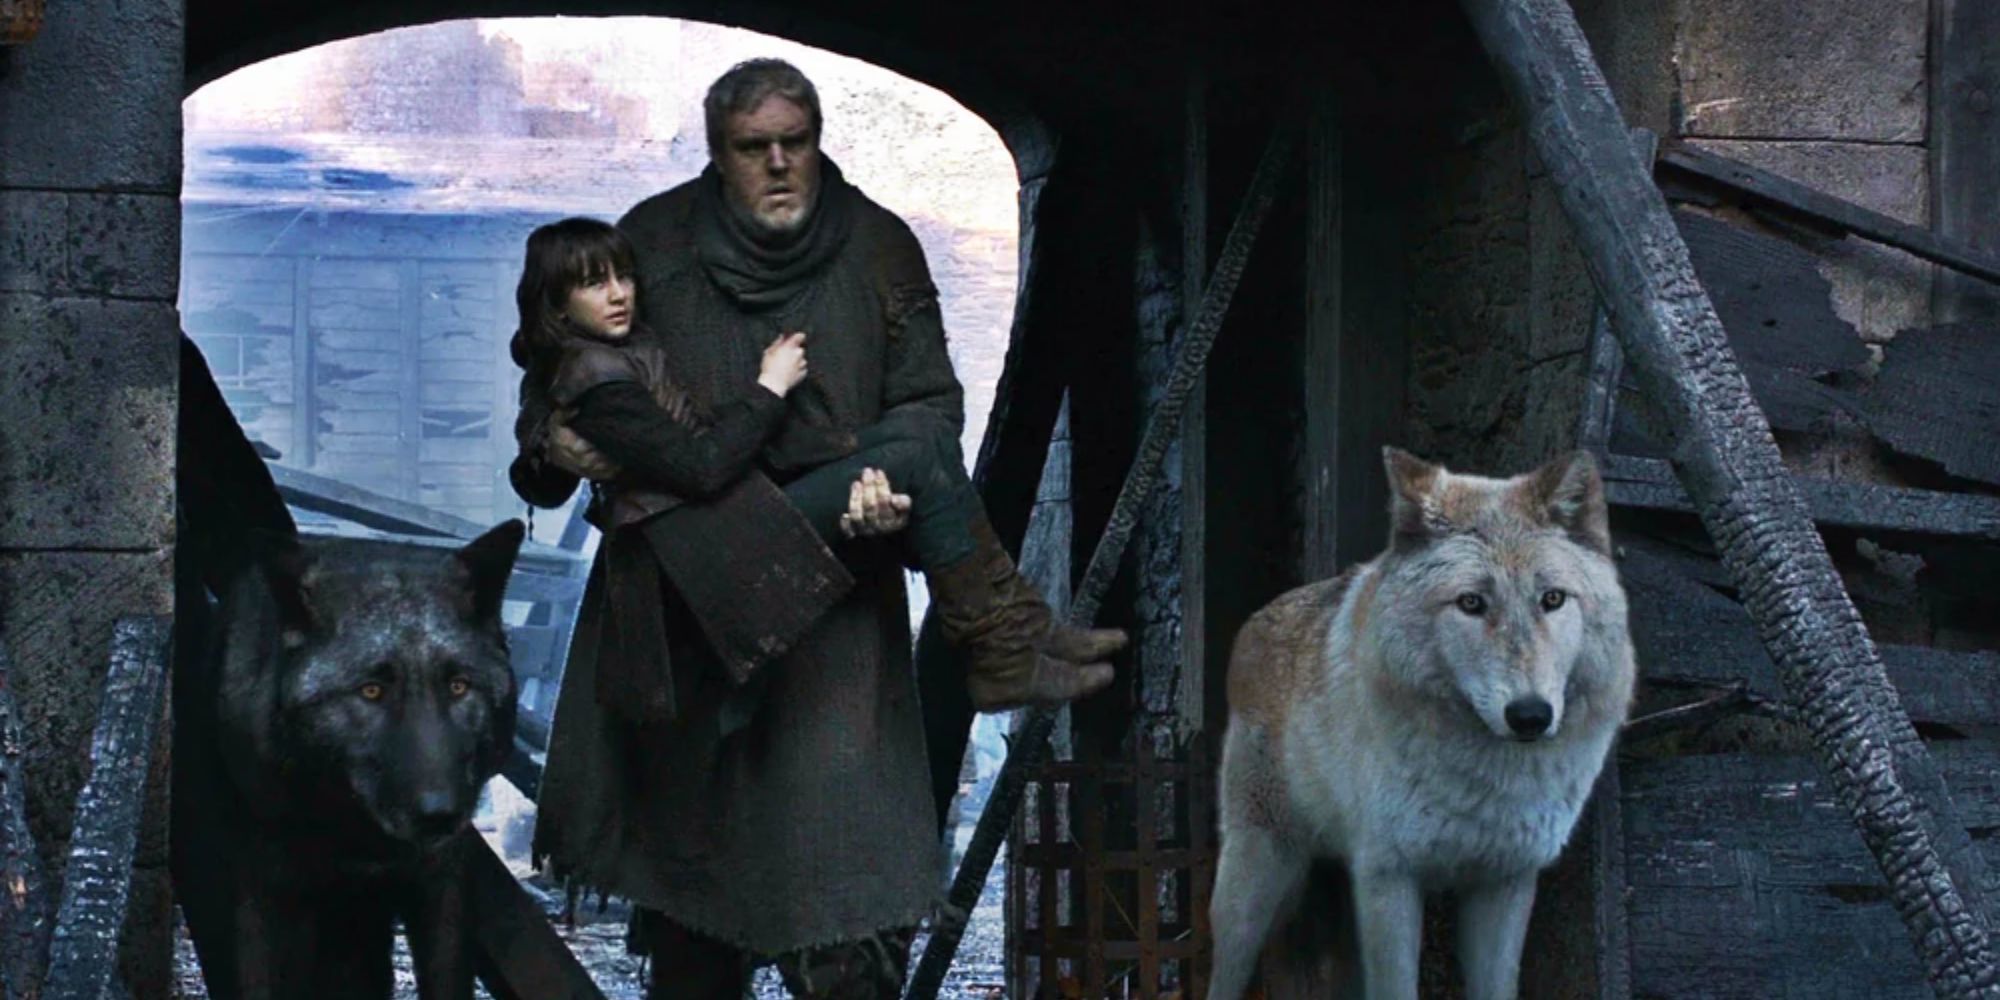 Game of Thrones Hodor carrying Bran with the direwolves Summer and Shaggydog